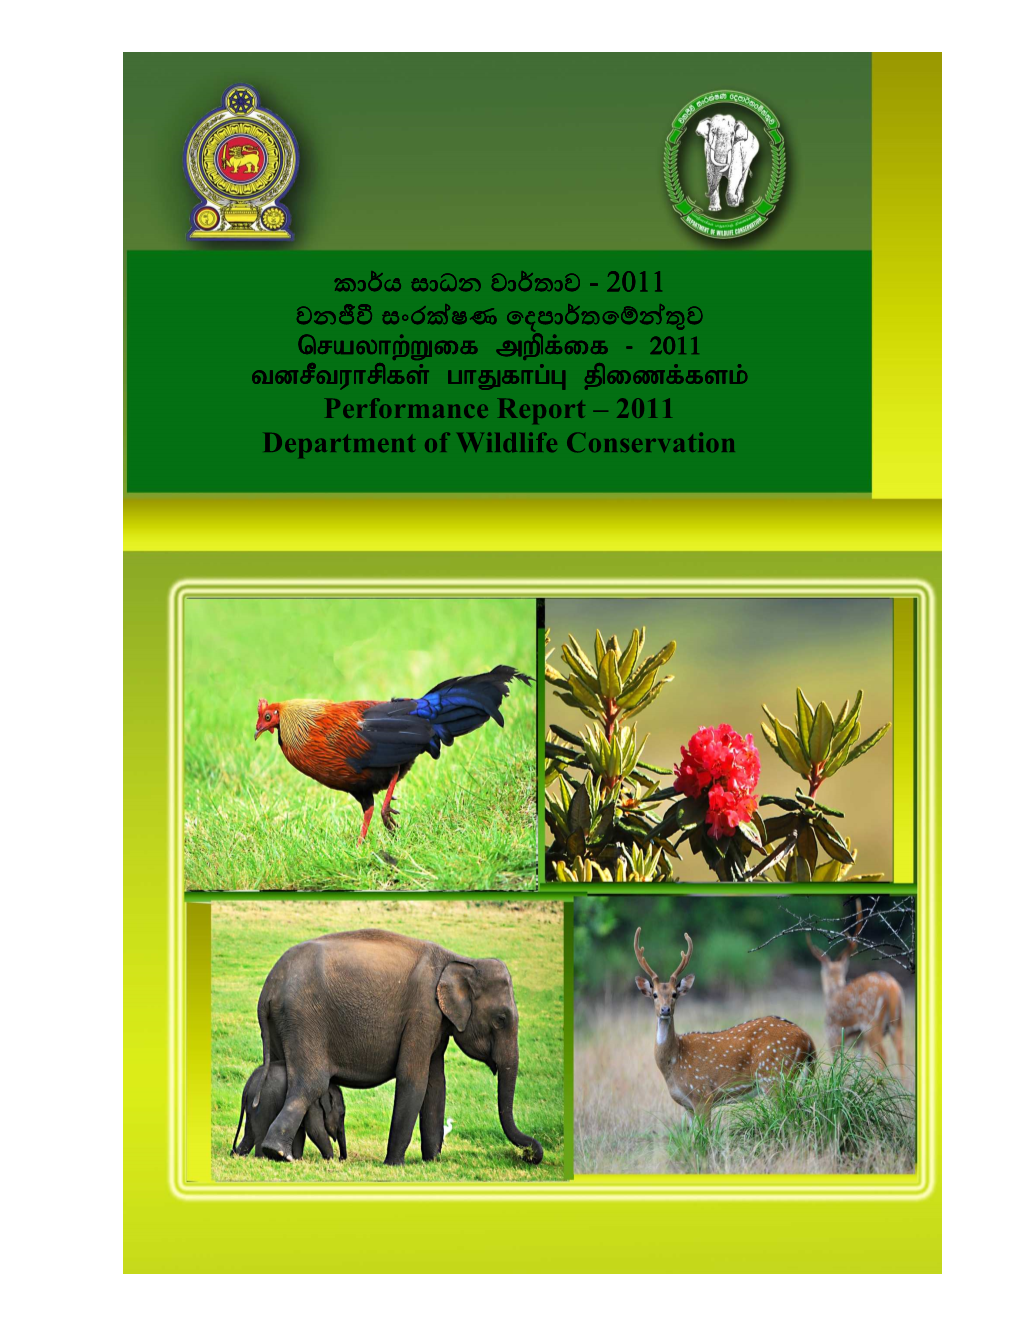 Department of Wildlife Conservation for the Year 2011